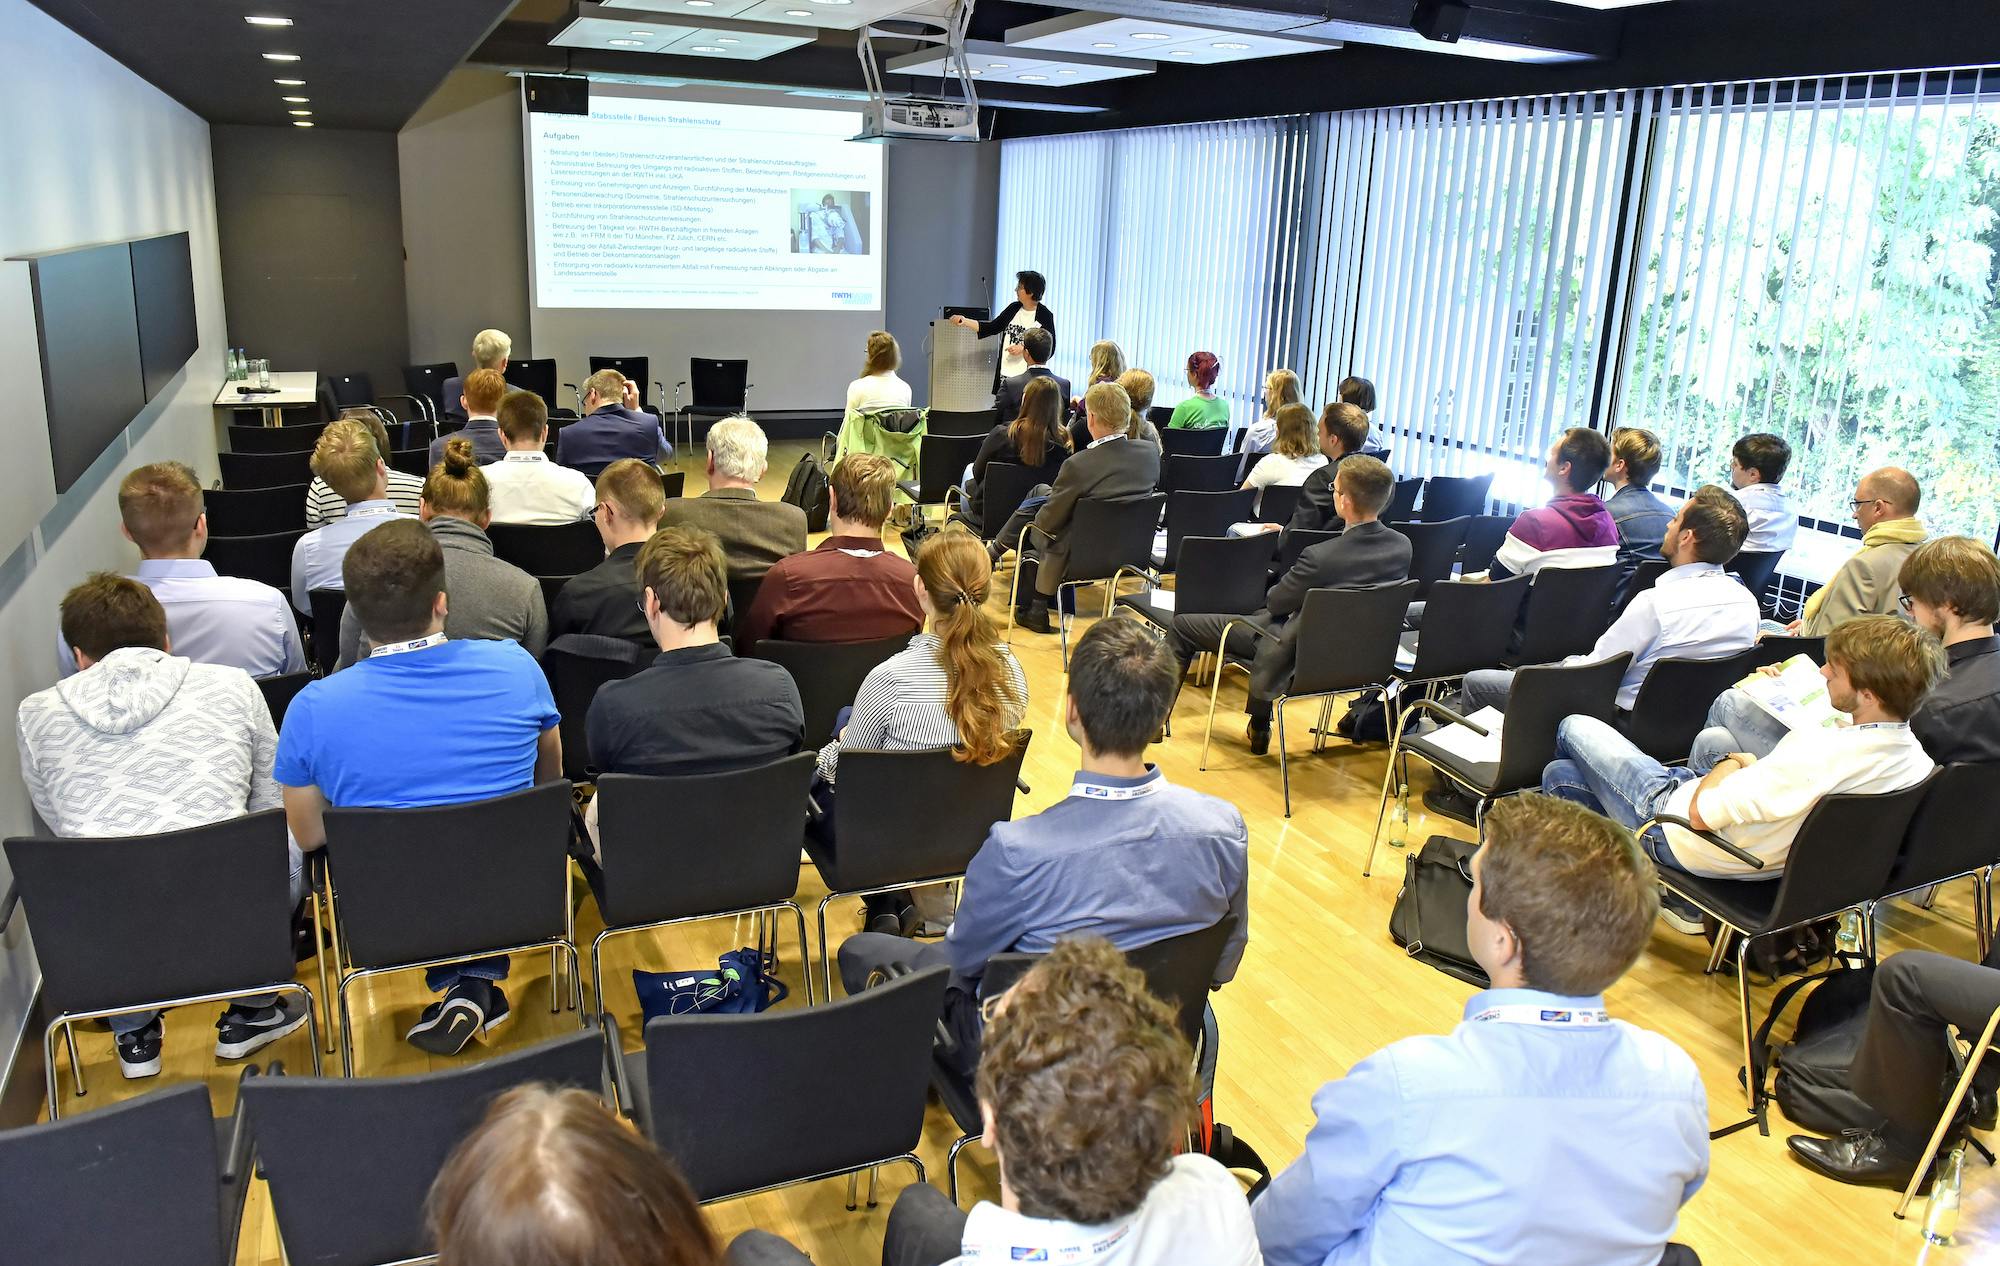 Scientists4Future Paderborn: Bridging Local Research with Global Sustainability